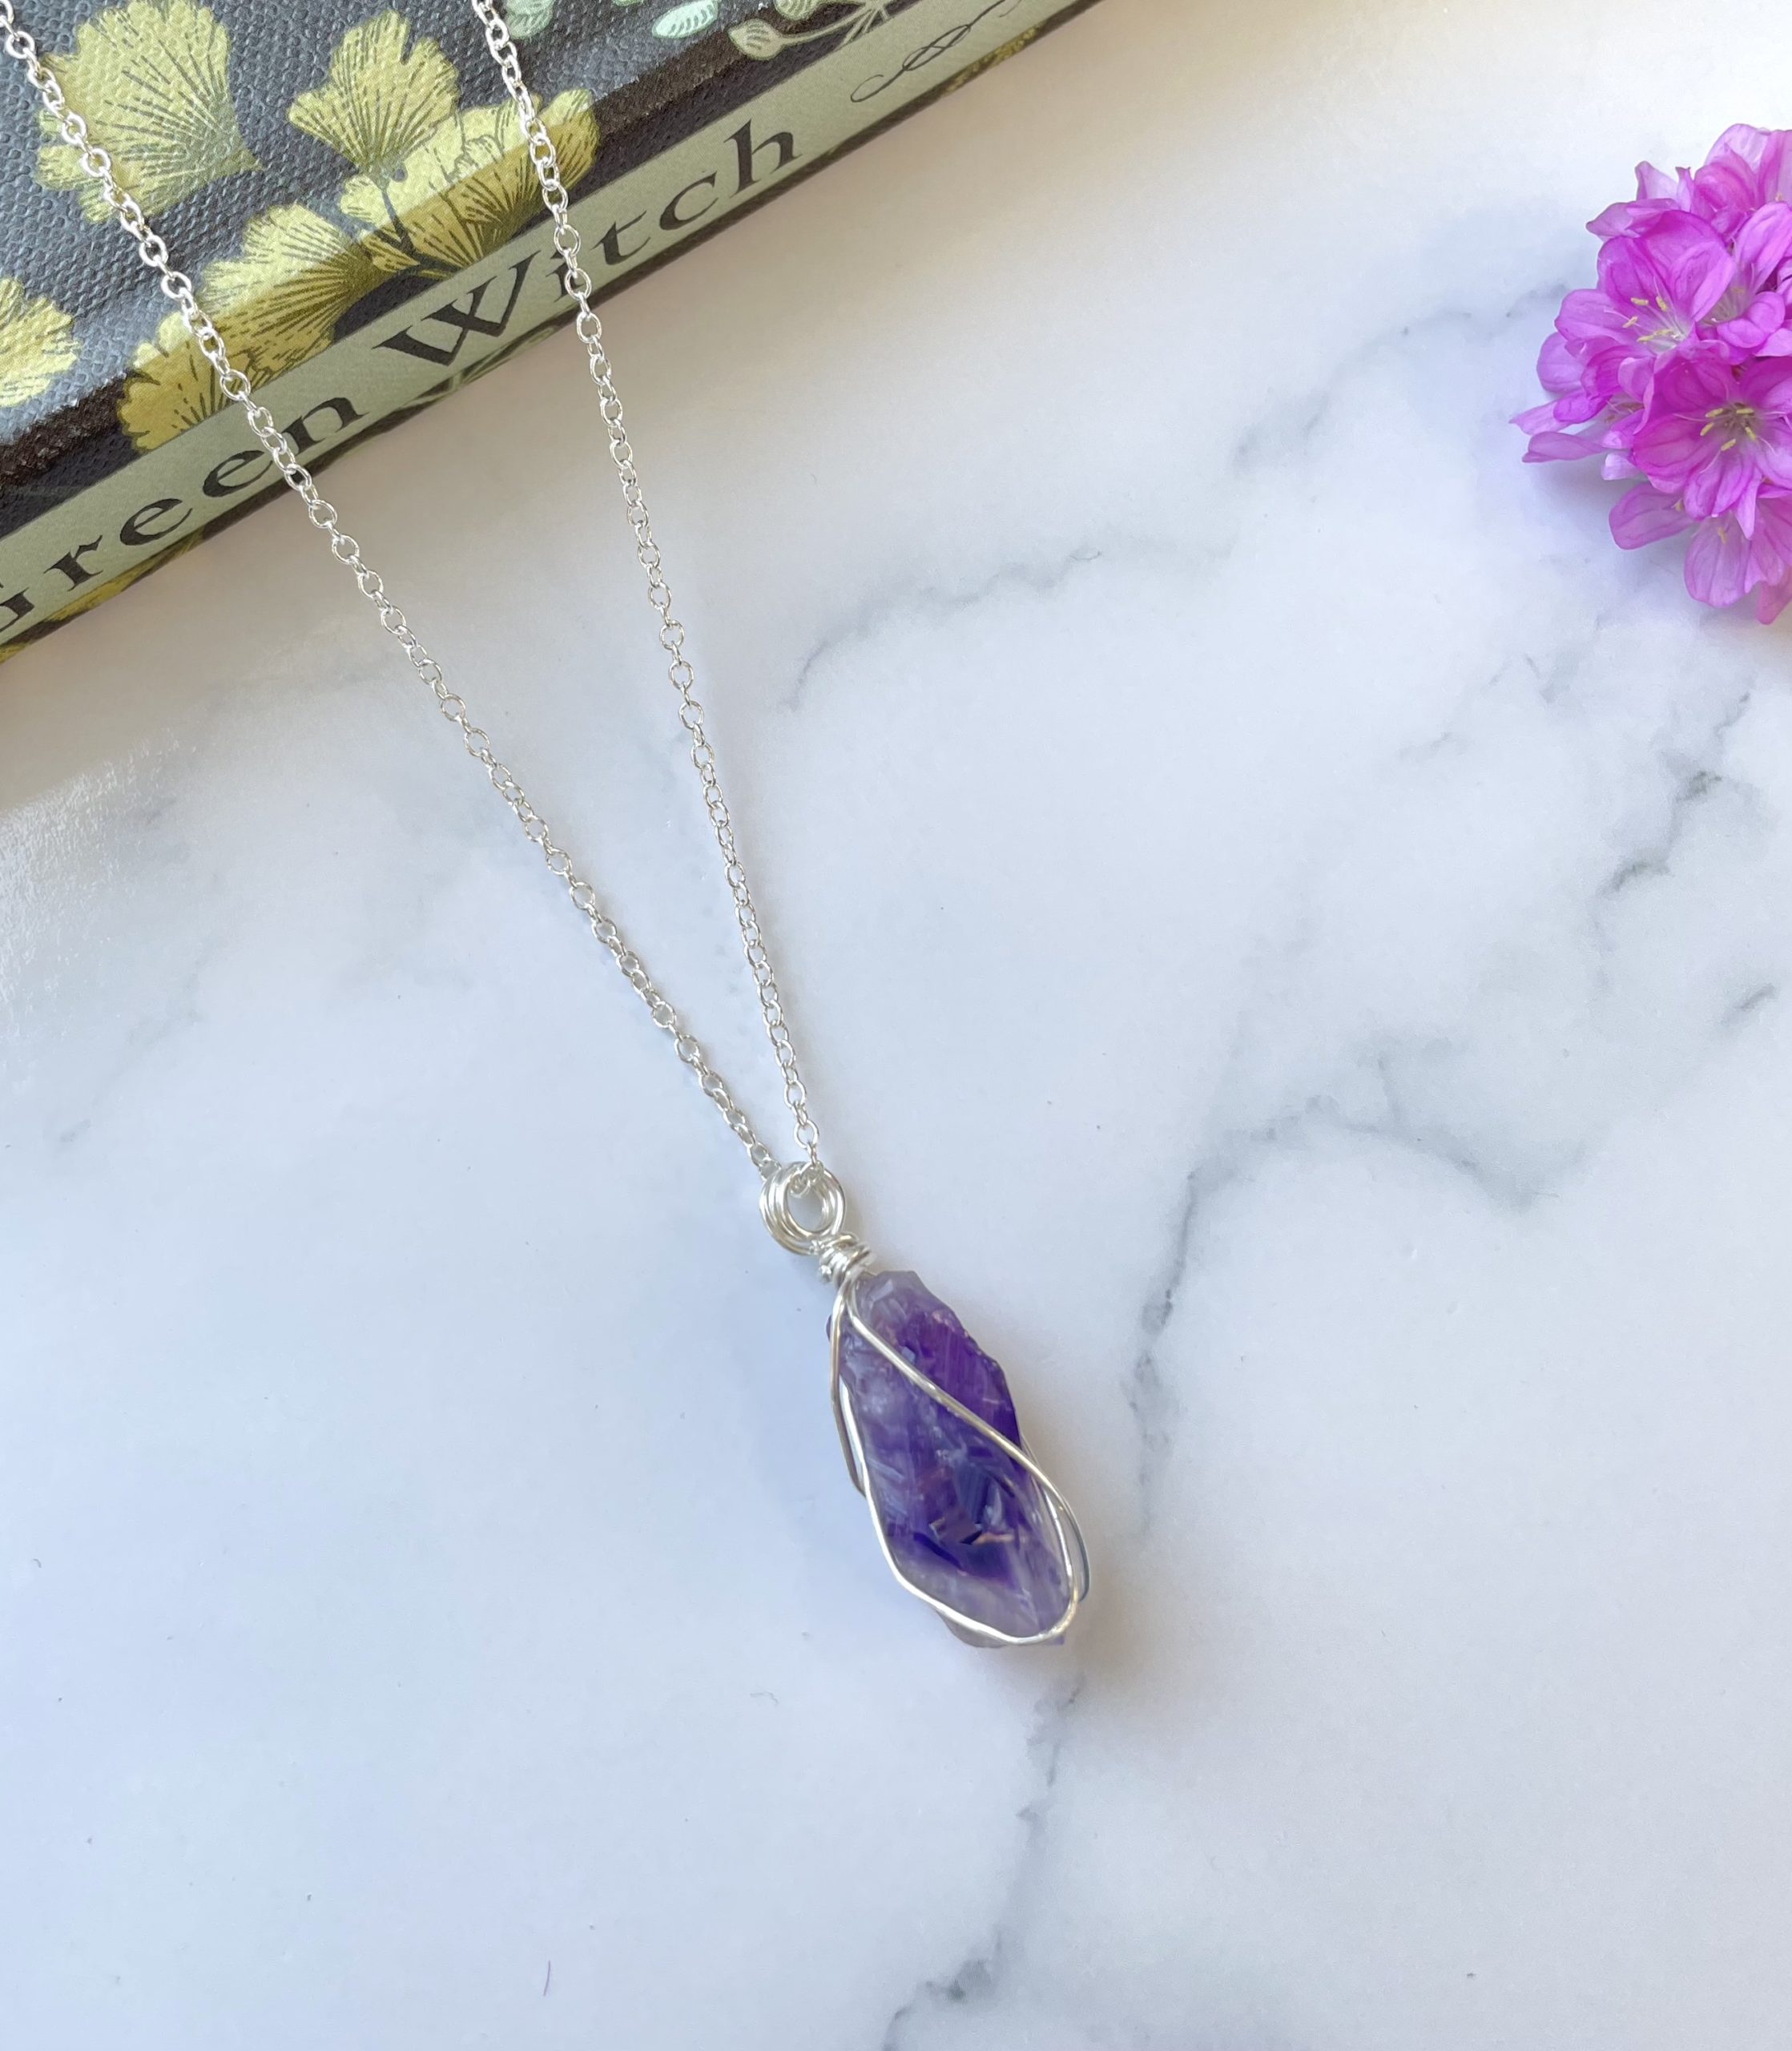 Learn Basic Wire Wrapping by Making this Simple Amethyst Pendant - YouTube